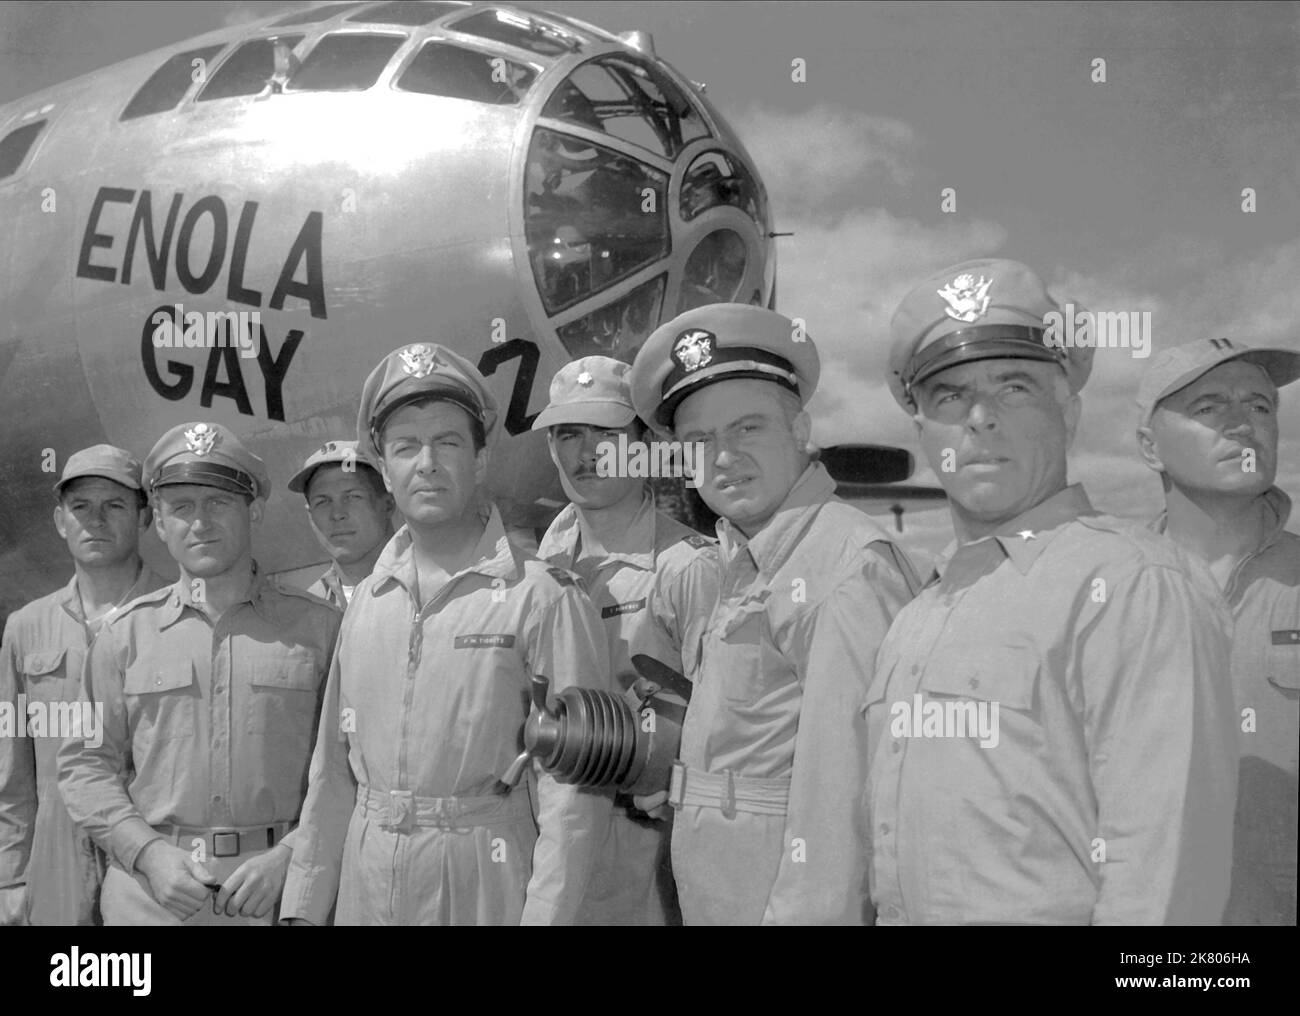 James Whitmore, Robert Taylor, Larry Gates, Larry Keating & Stephen Dunne Film: Above And Beyond (USA 1952) Characters: Maj. William 'Bill' Uanna - Security Officer, Operation Silverplate, Lt. Col. Paul W. Tibbets 509th Composite Group CO (pilot of Enola Gay), Capt. William 'Deak' Parsons, USN, Maj. Gen. Vernon C. Brent, Maj. Harry Bratton, Co-pilot B-29 tests  Director: Melvin Frank & Norman Panama 31 December 1952   **WARNING** This Photograph is for editorial use only and is the copyright of MGM and/or the Photographer assigned by the Film or Production Company and can only be reproduced by Stock Photo